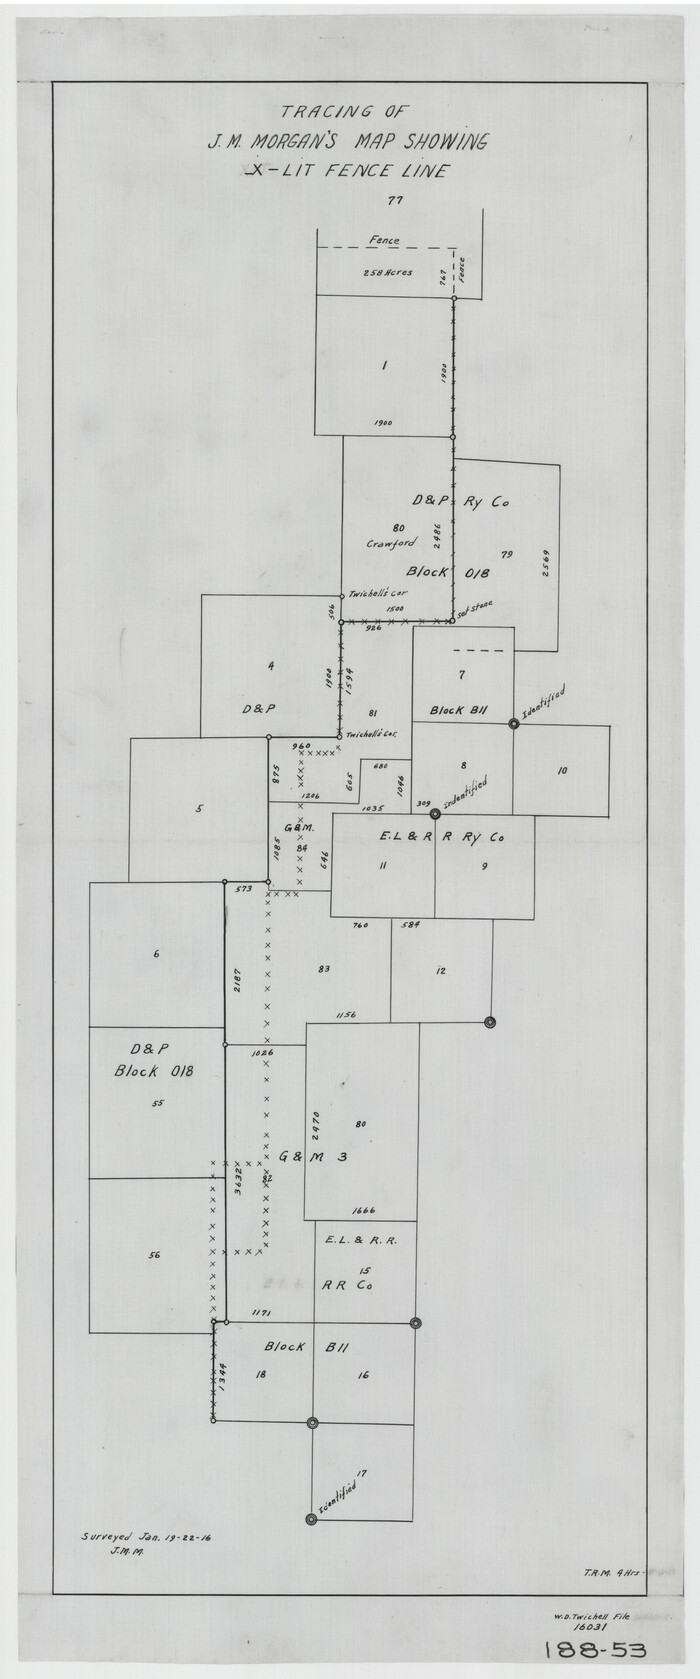 91809, Tracing of J. M. Morgan's Map Showing X-LIT Fence Line, Twichell Survey Records